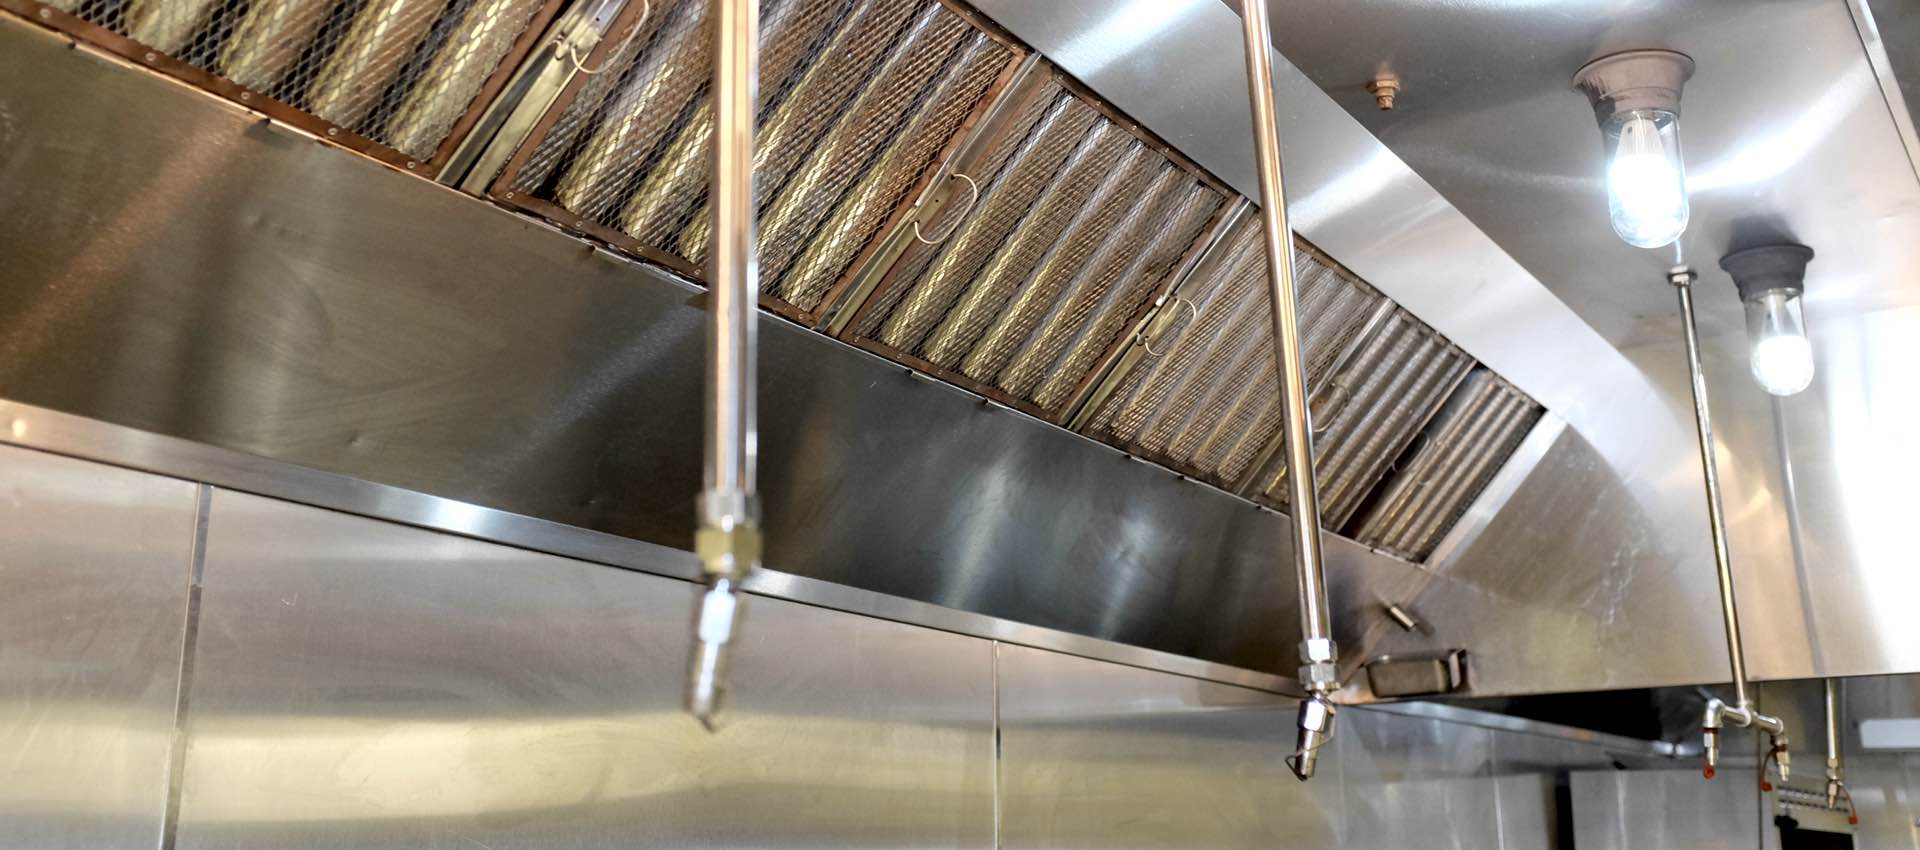 Cleaning Schedule of Commercial Kitchen Extractor Components